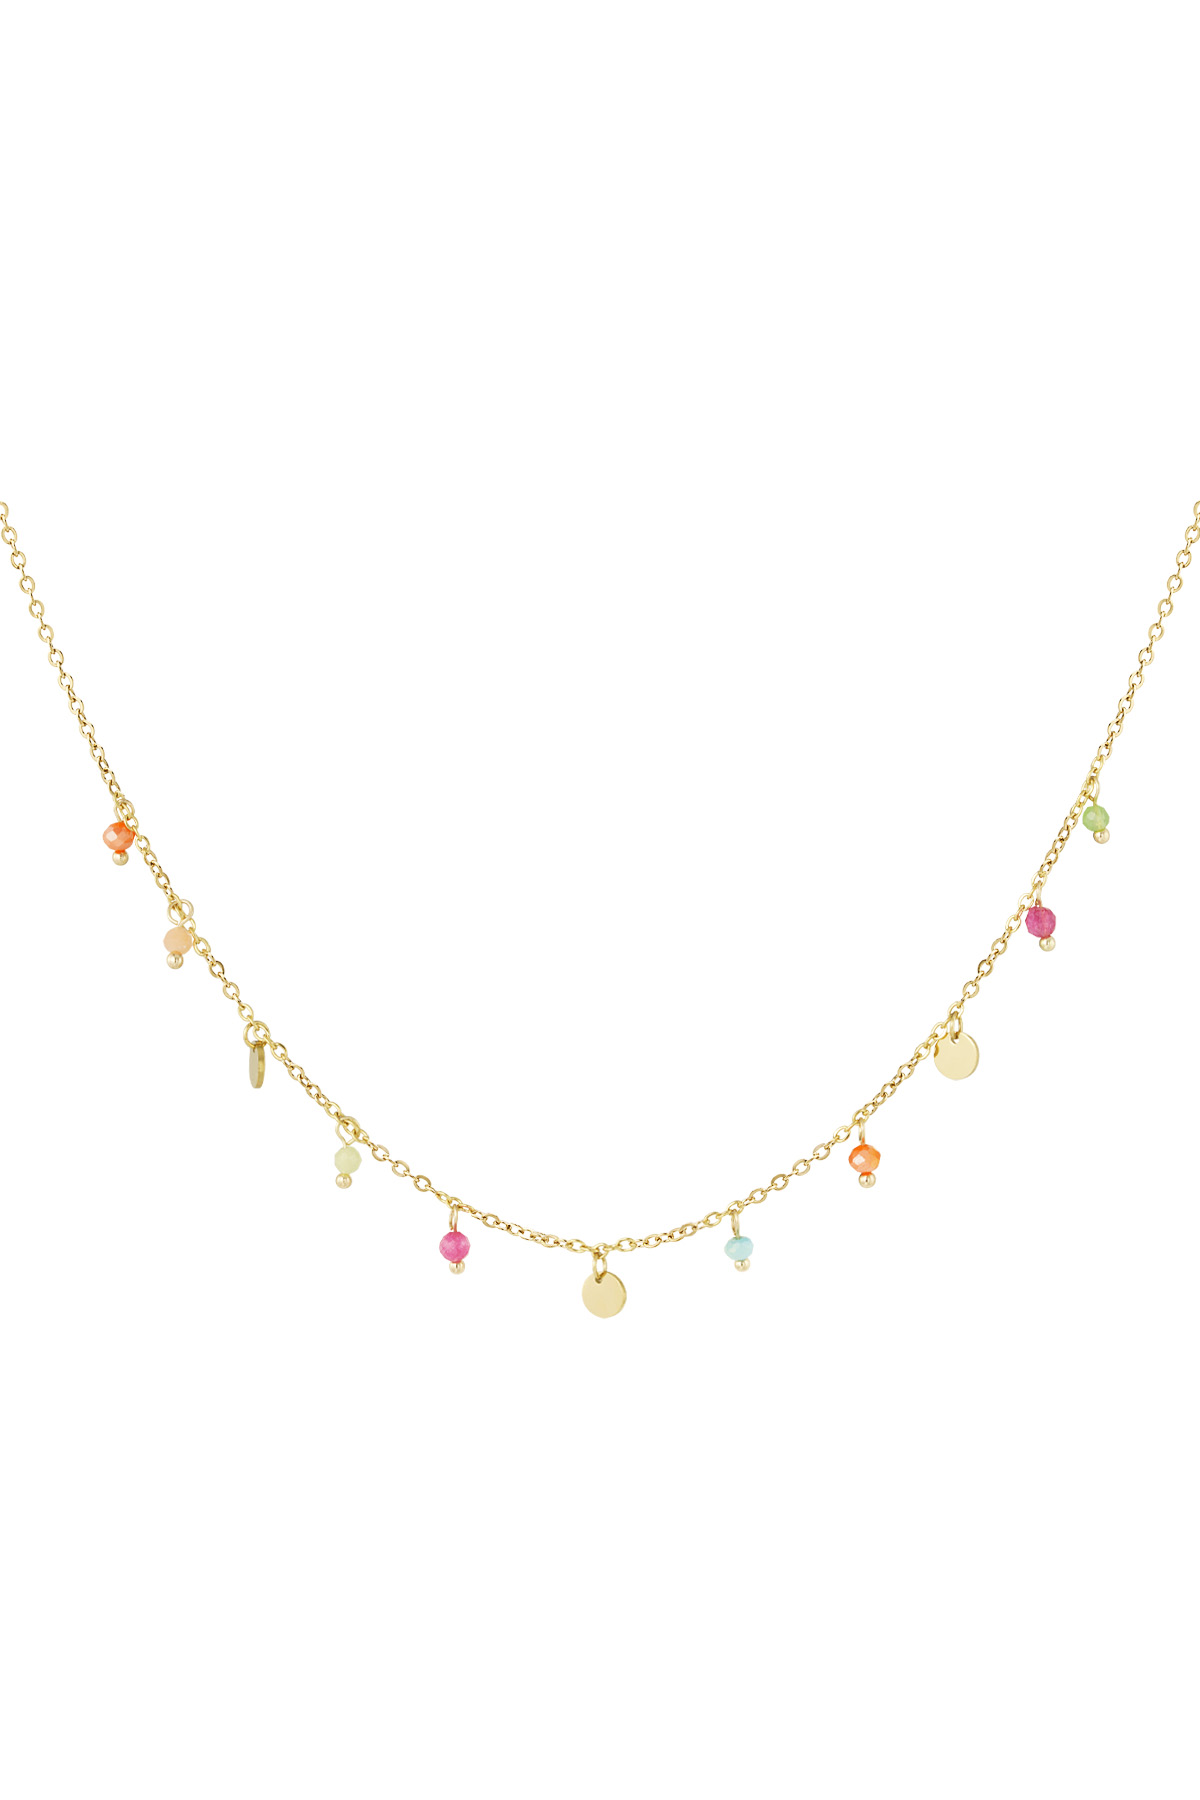 Bedelketting colorful day - goud